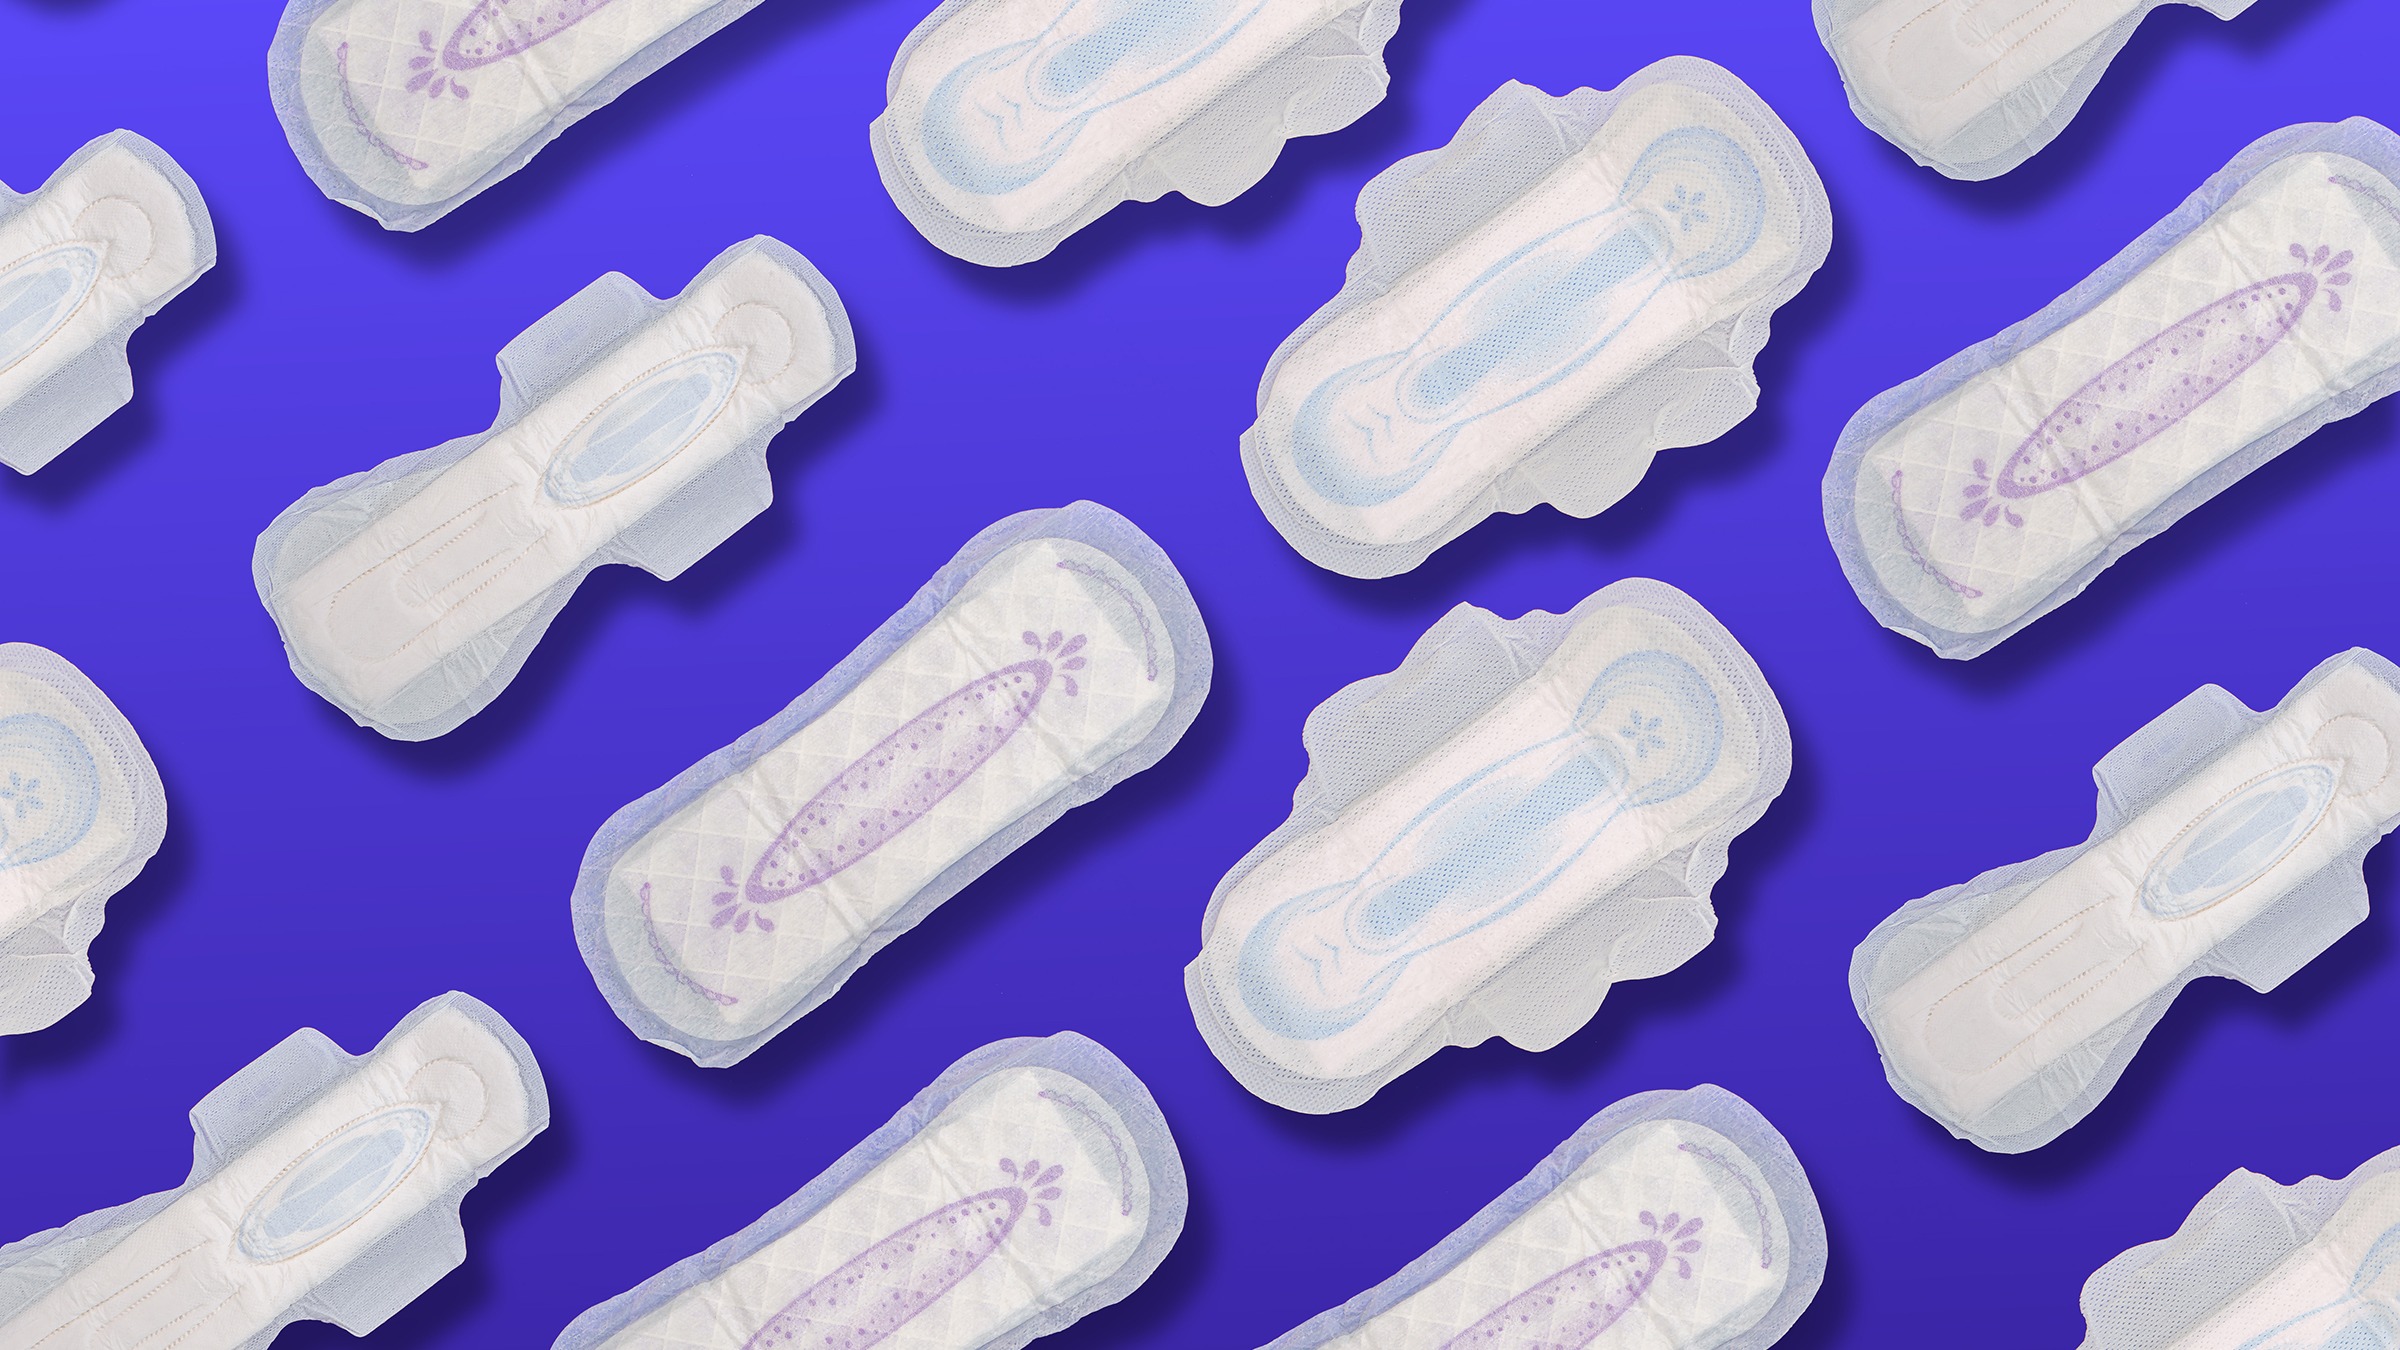 How to Stop Period Cramps: 5 Over-the-Counter Medication Options - GoodRx